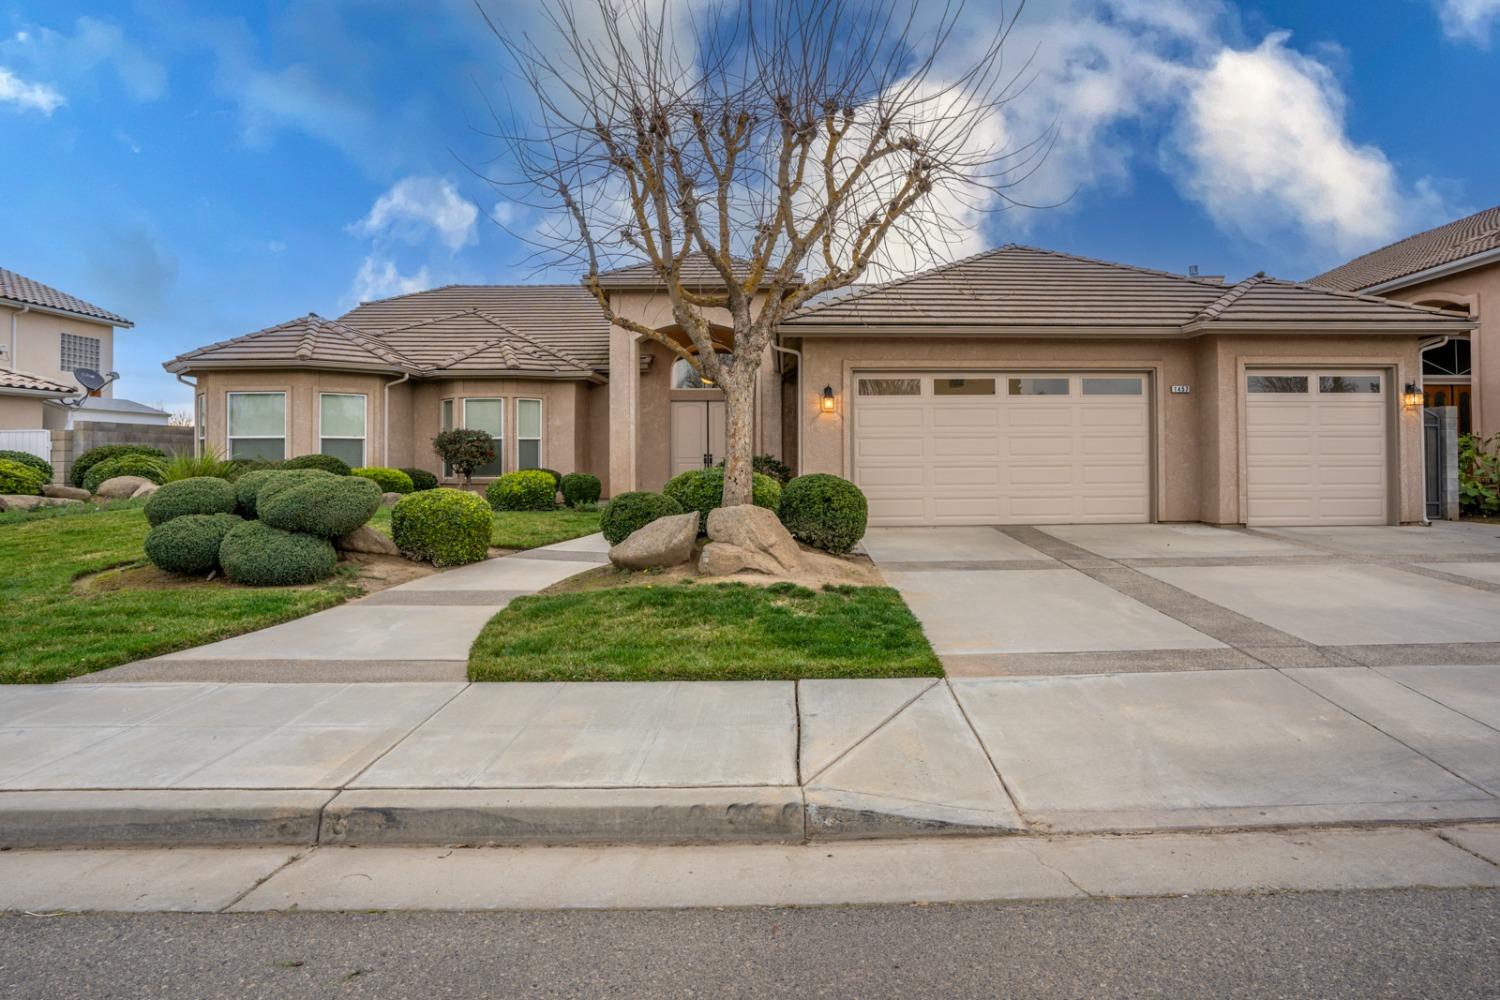 Photo of 1457 Penny Wy in Madera, CA